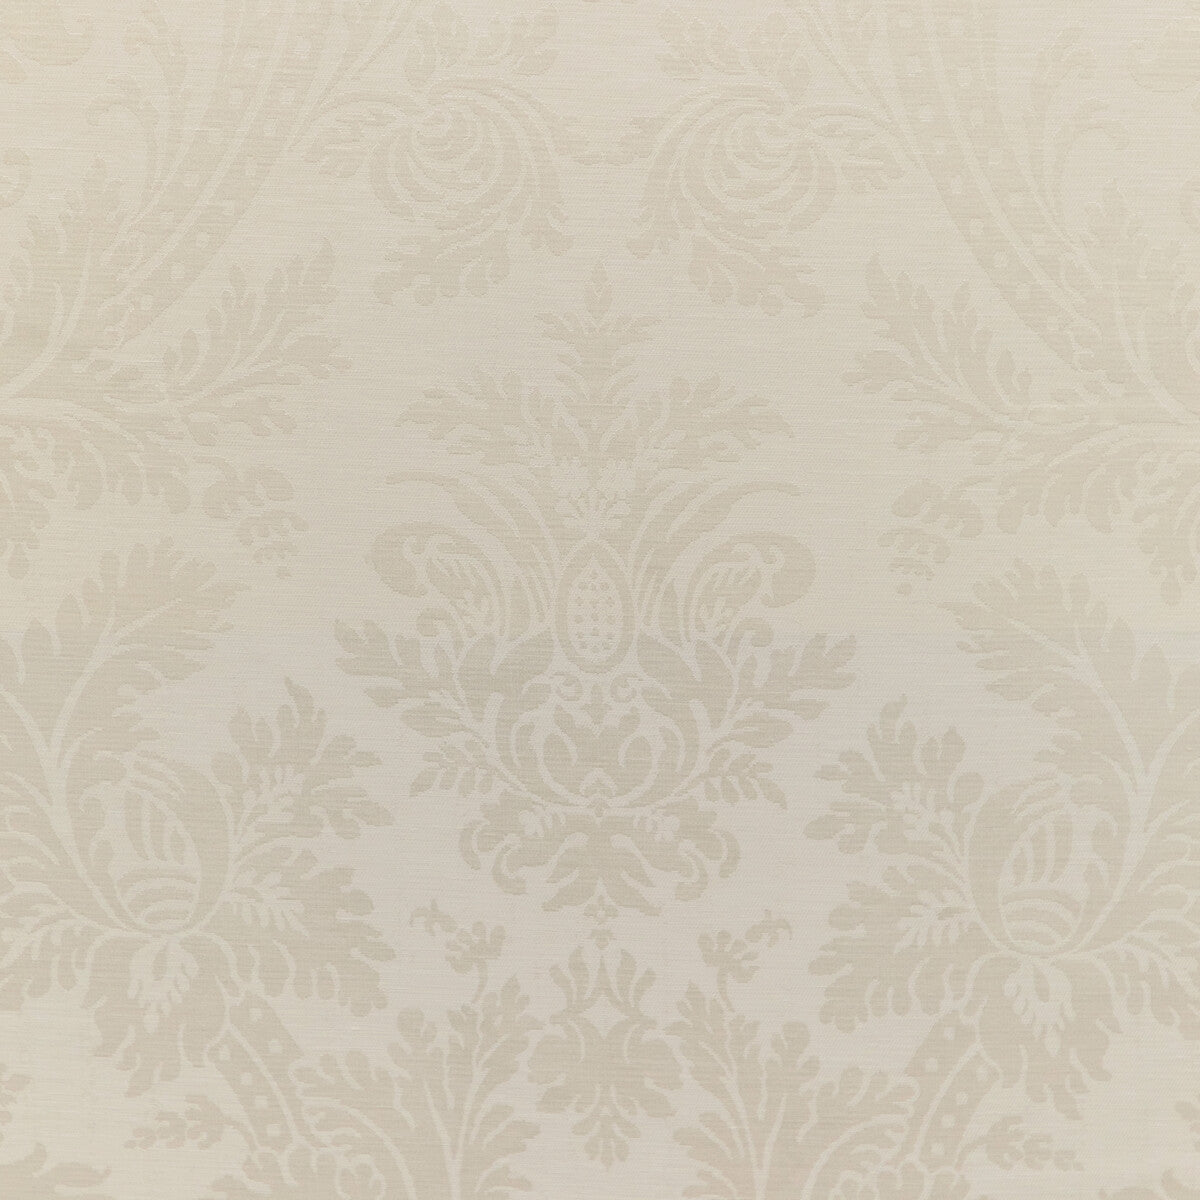 Arnaud Damask fabric in ivory color - pattern 8023150.1.0 - by Brunschwig &amp; Fils in the Vienne Silks collection